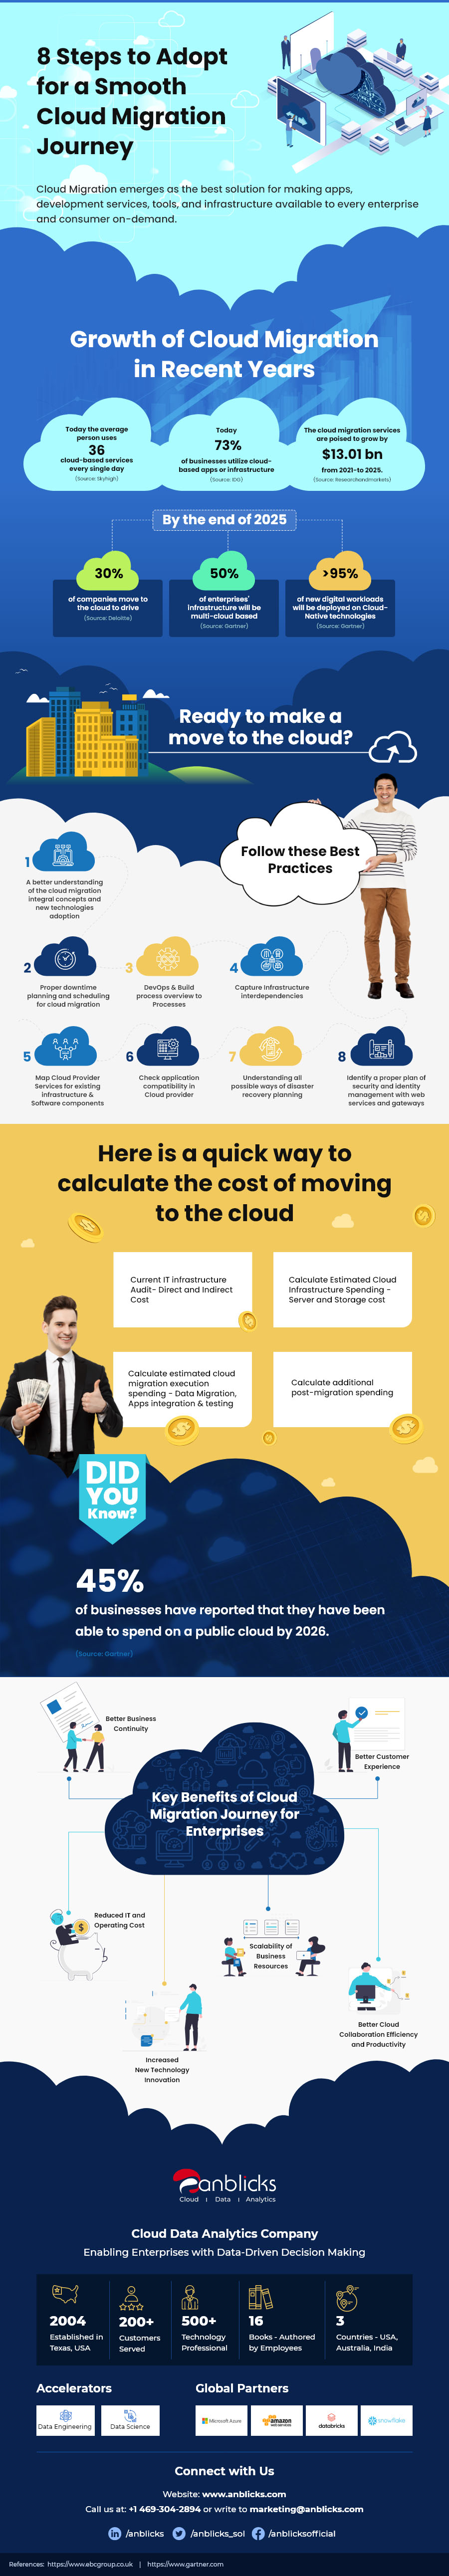 8 Steps for a Smooth Cloud Migration Journey